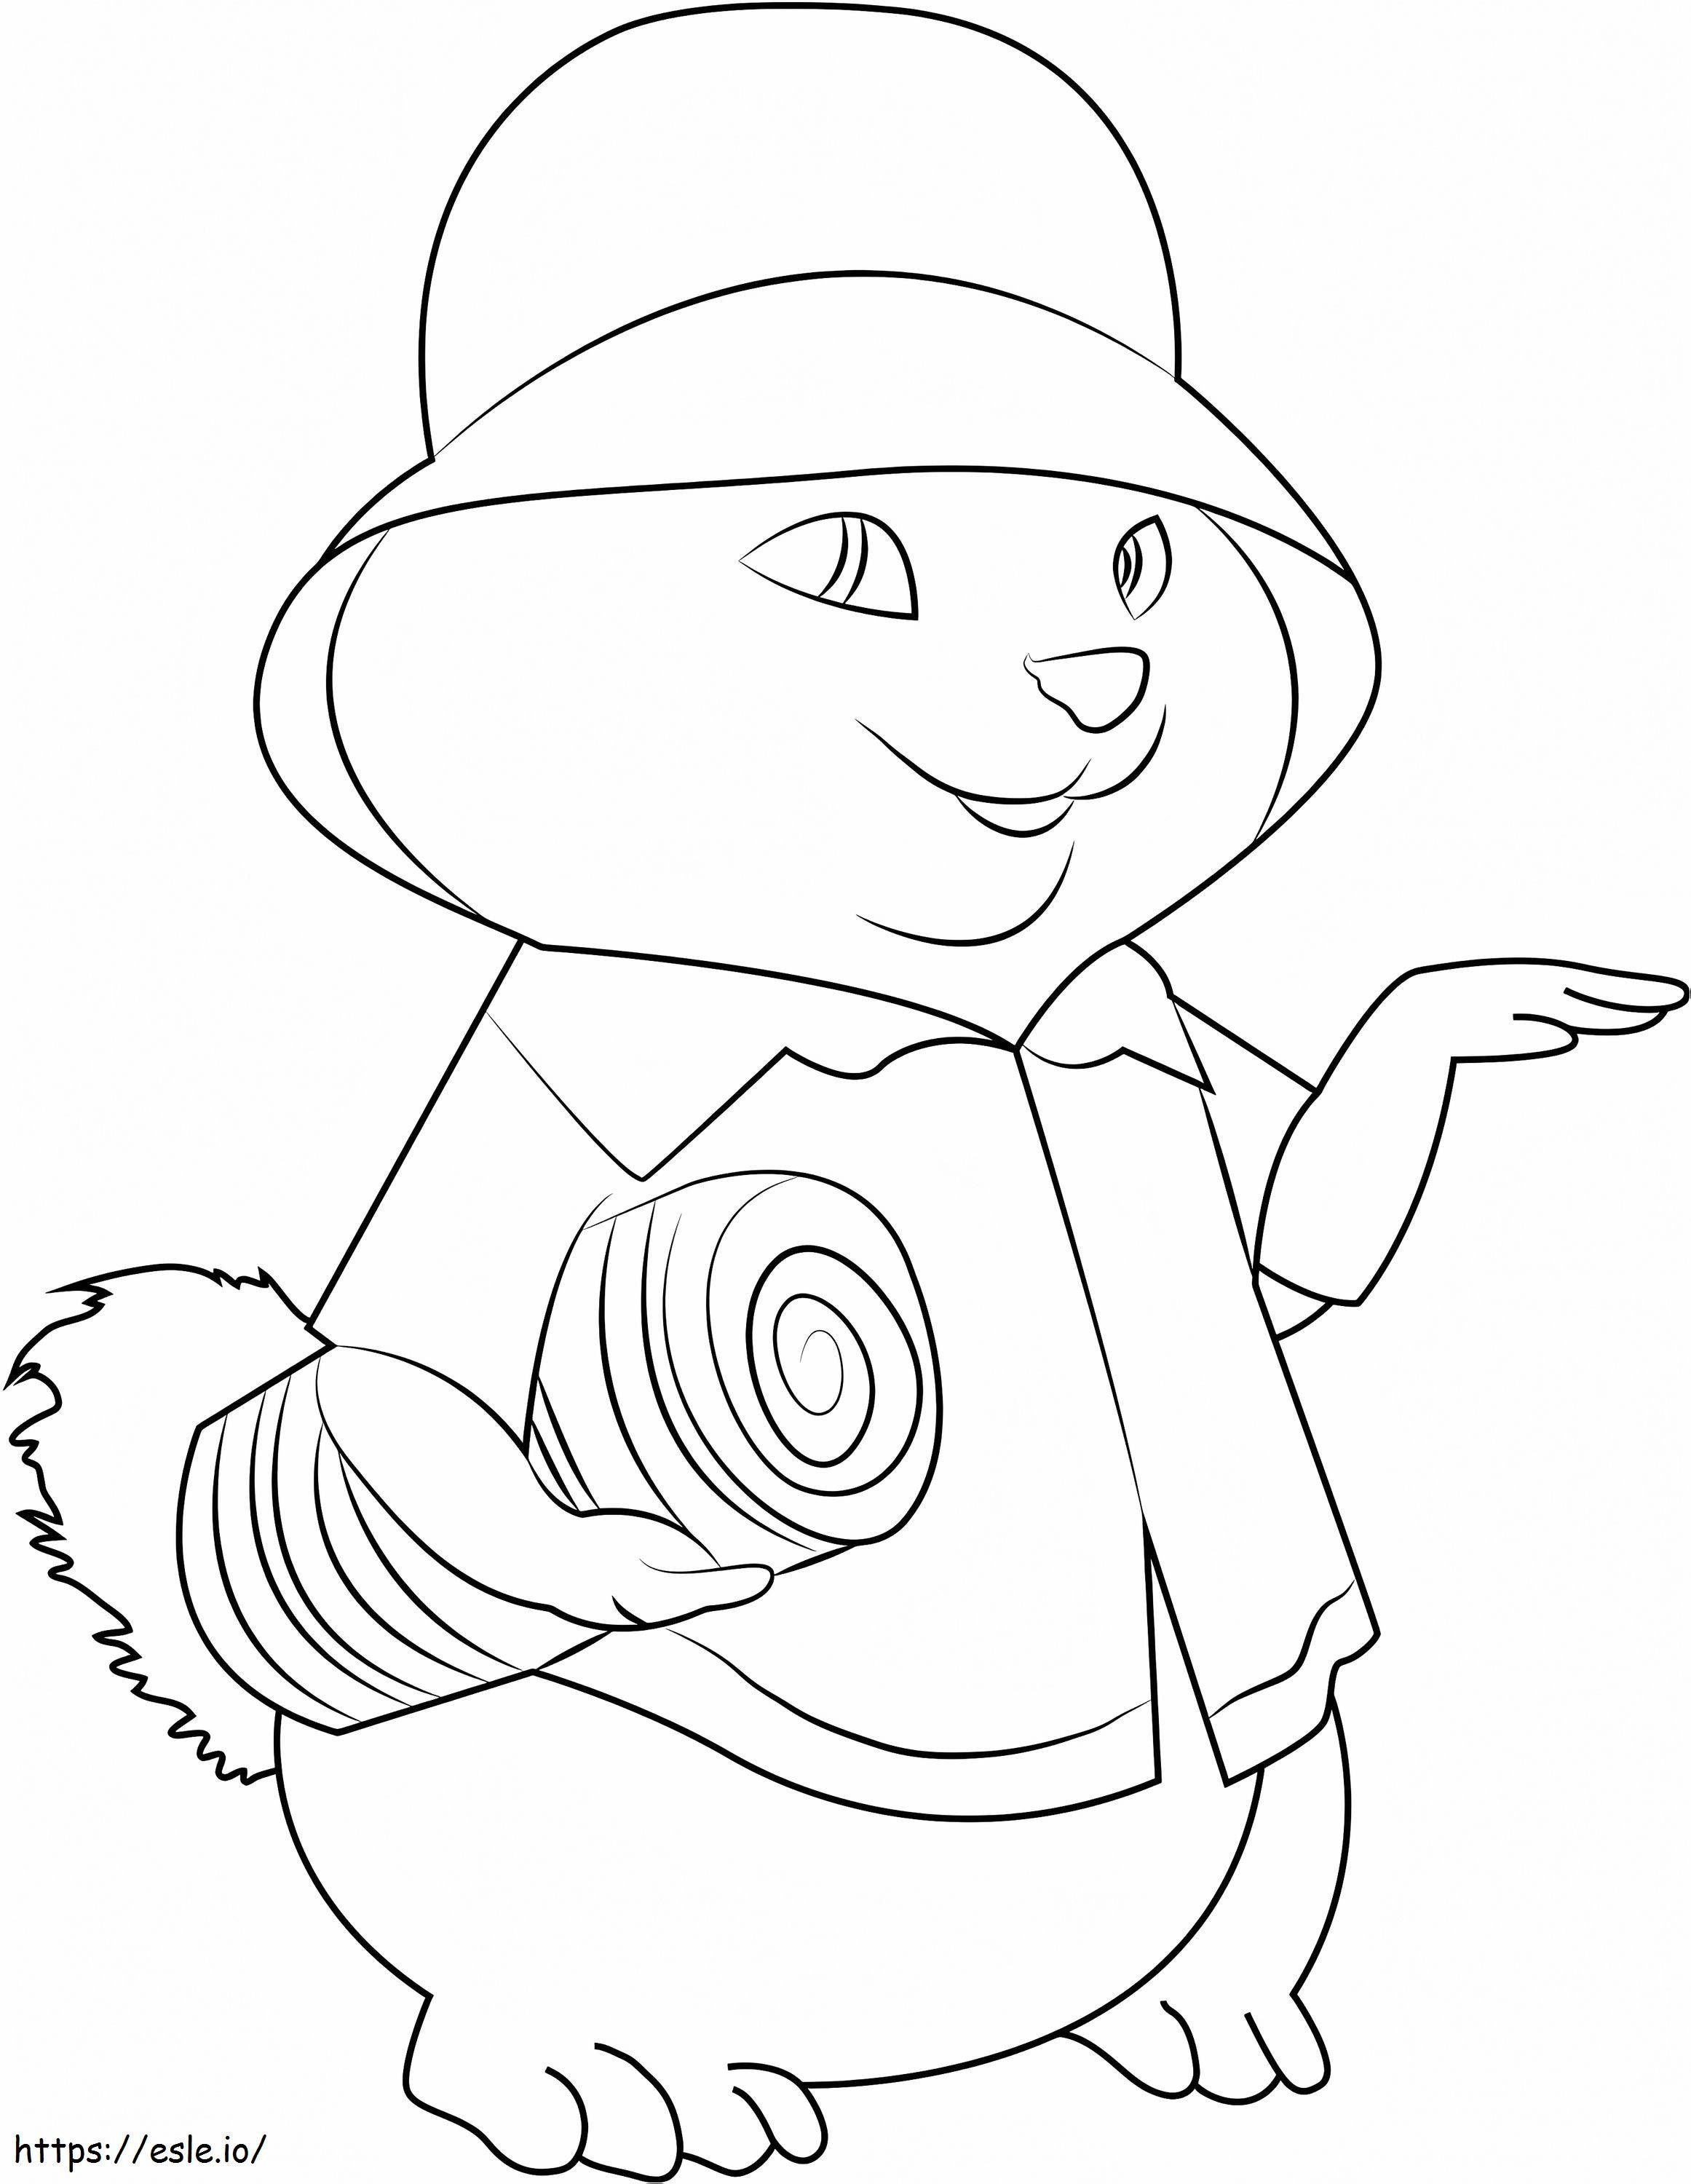 1532490027 Cute Theodore A4 coloring page